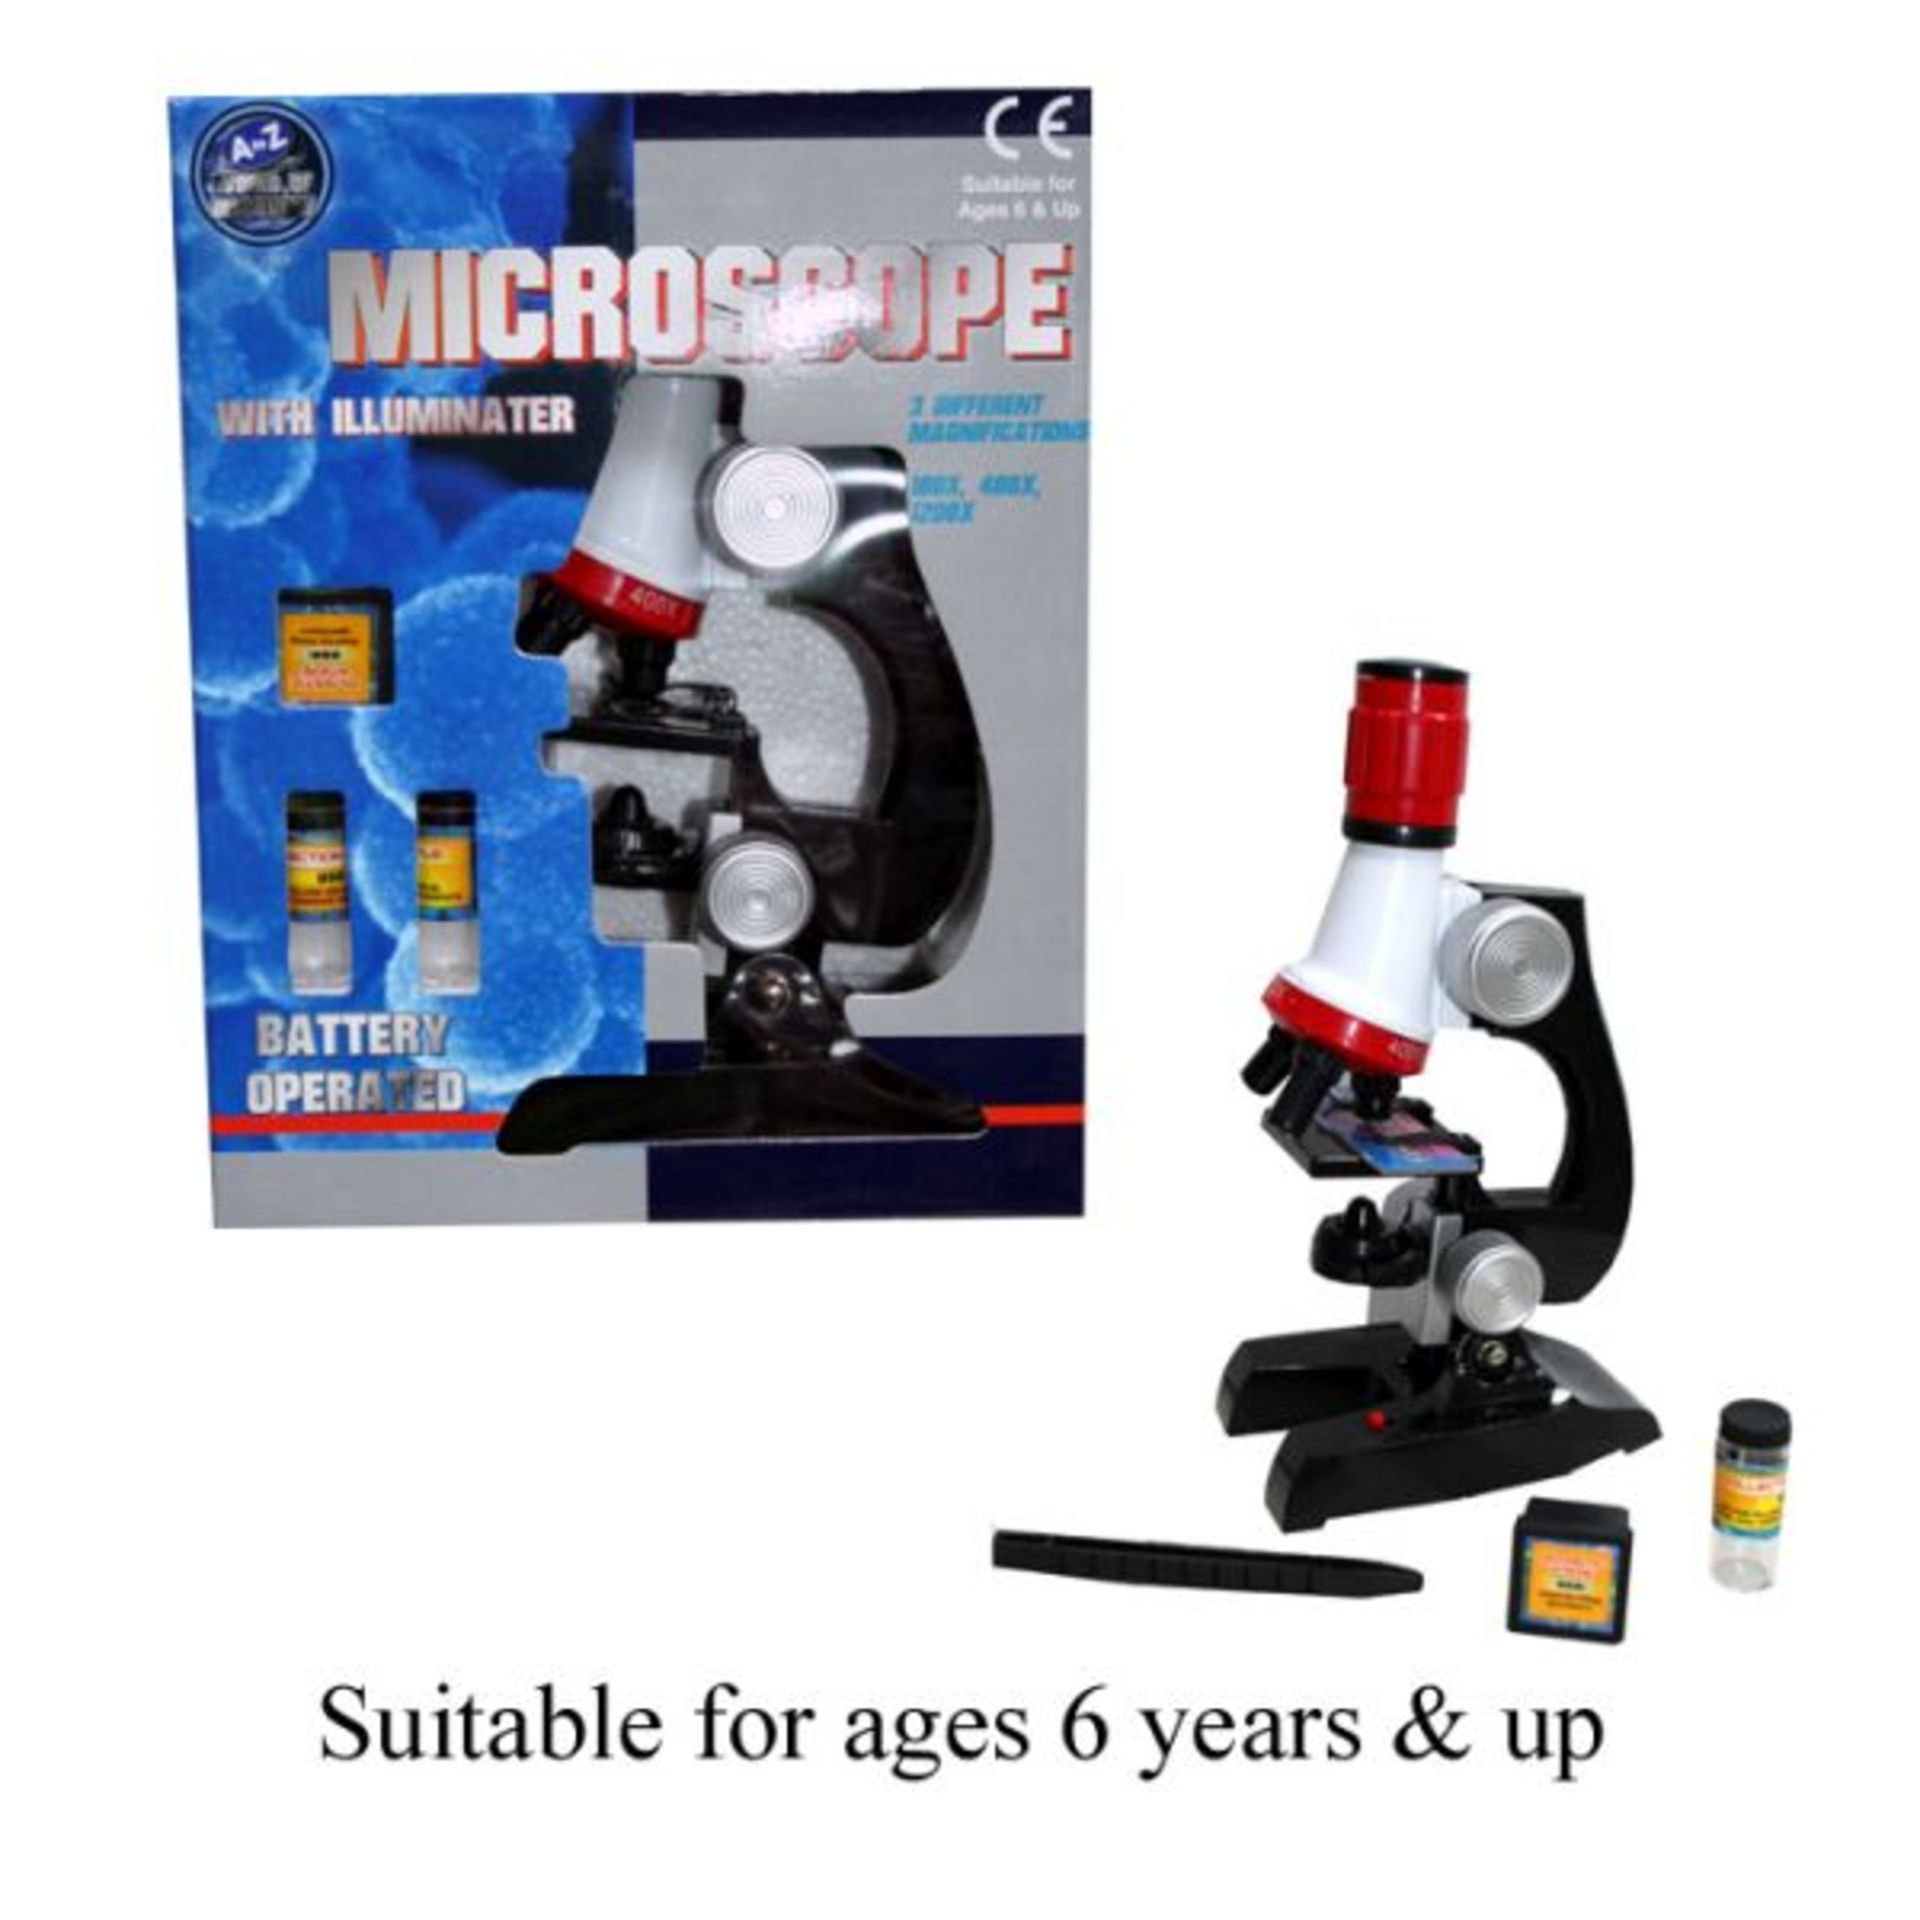 V *TRADE QTY* Brand New Kids Scientific Microscpoe Play Set With Illuminater - 3 Different